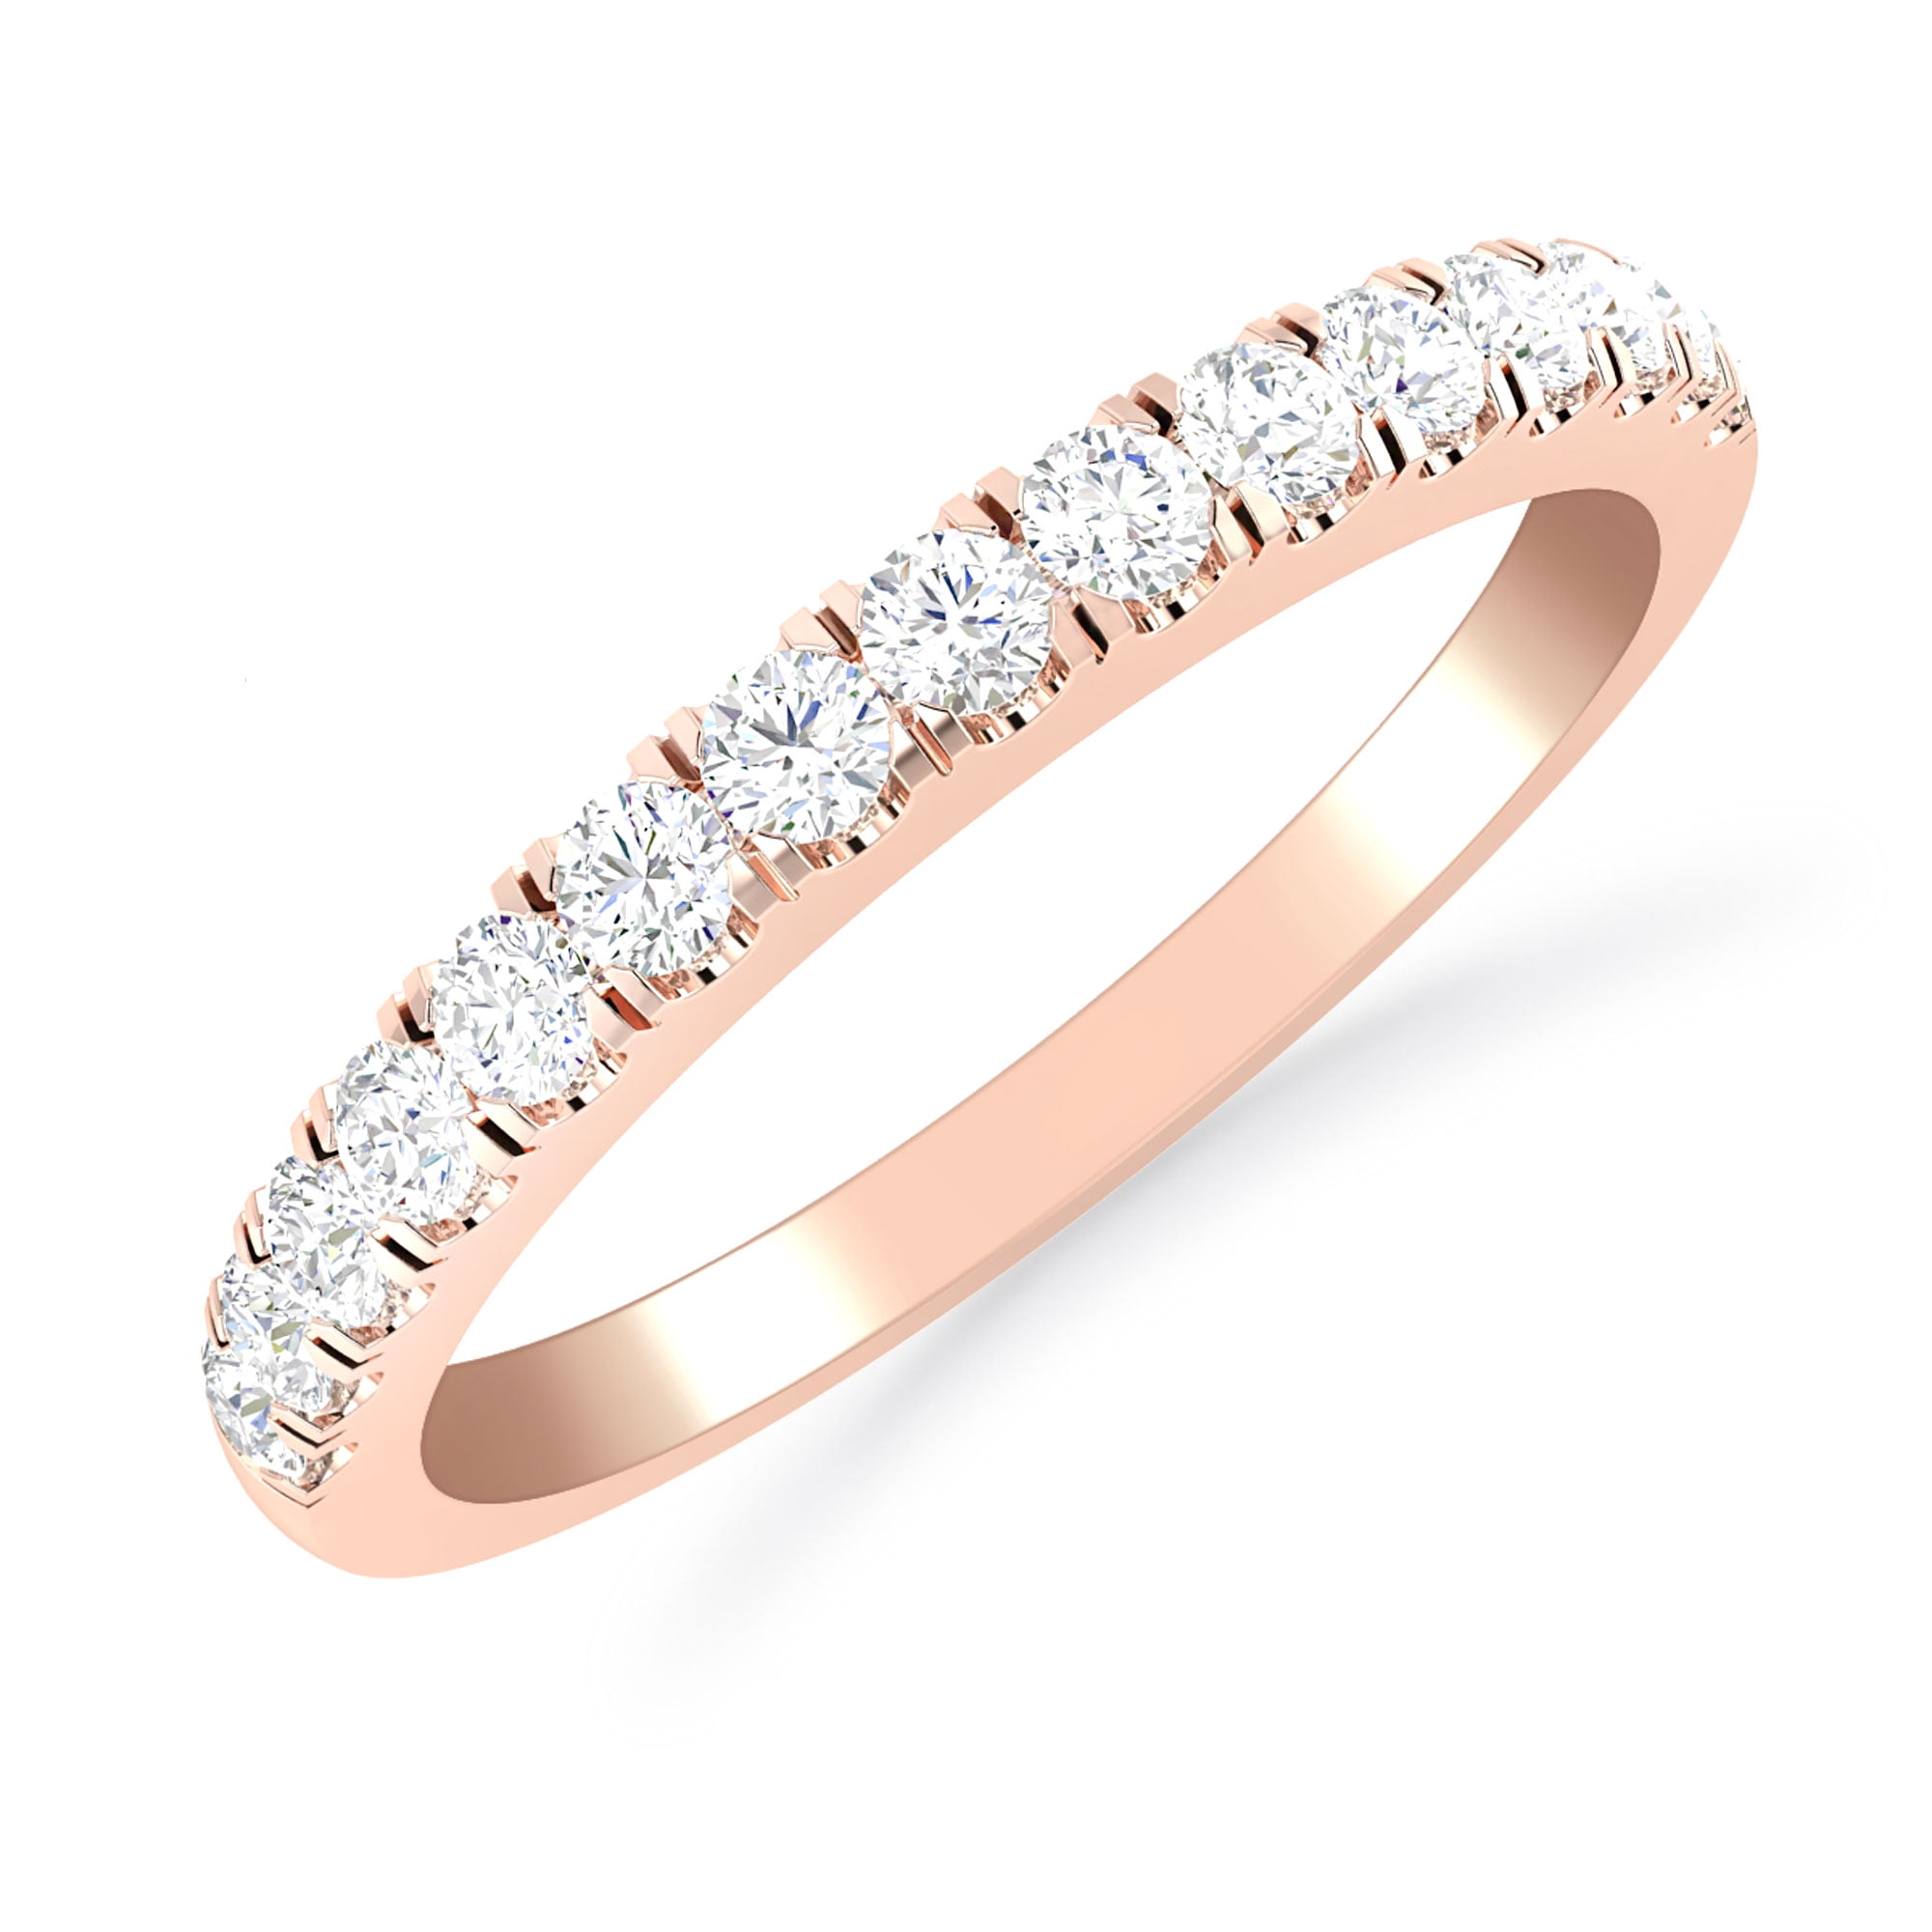 G-H,I2-I3 1/20 cttw, Diamond Wedding Band in 10K Pink Gold Size-6.25